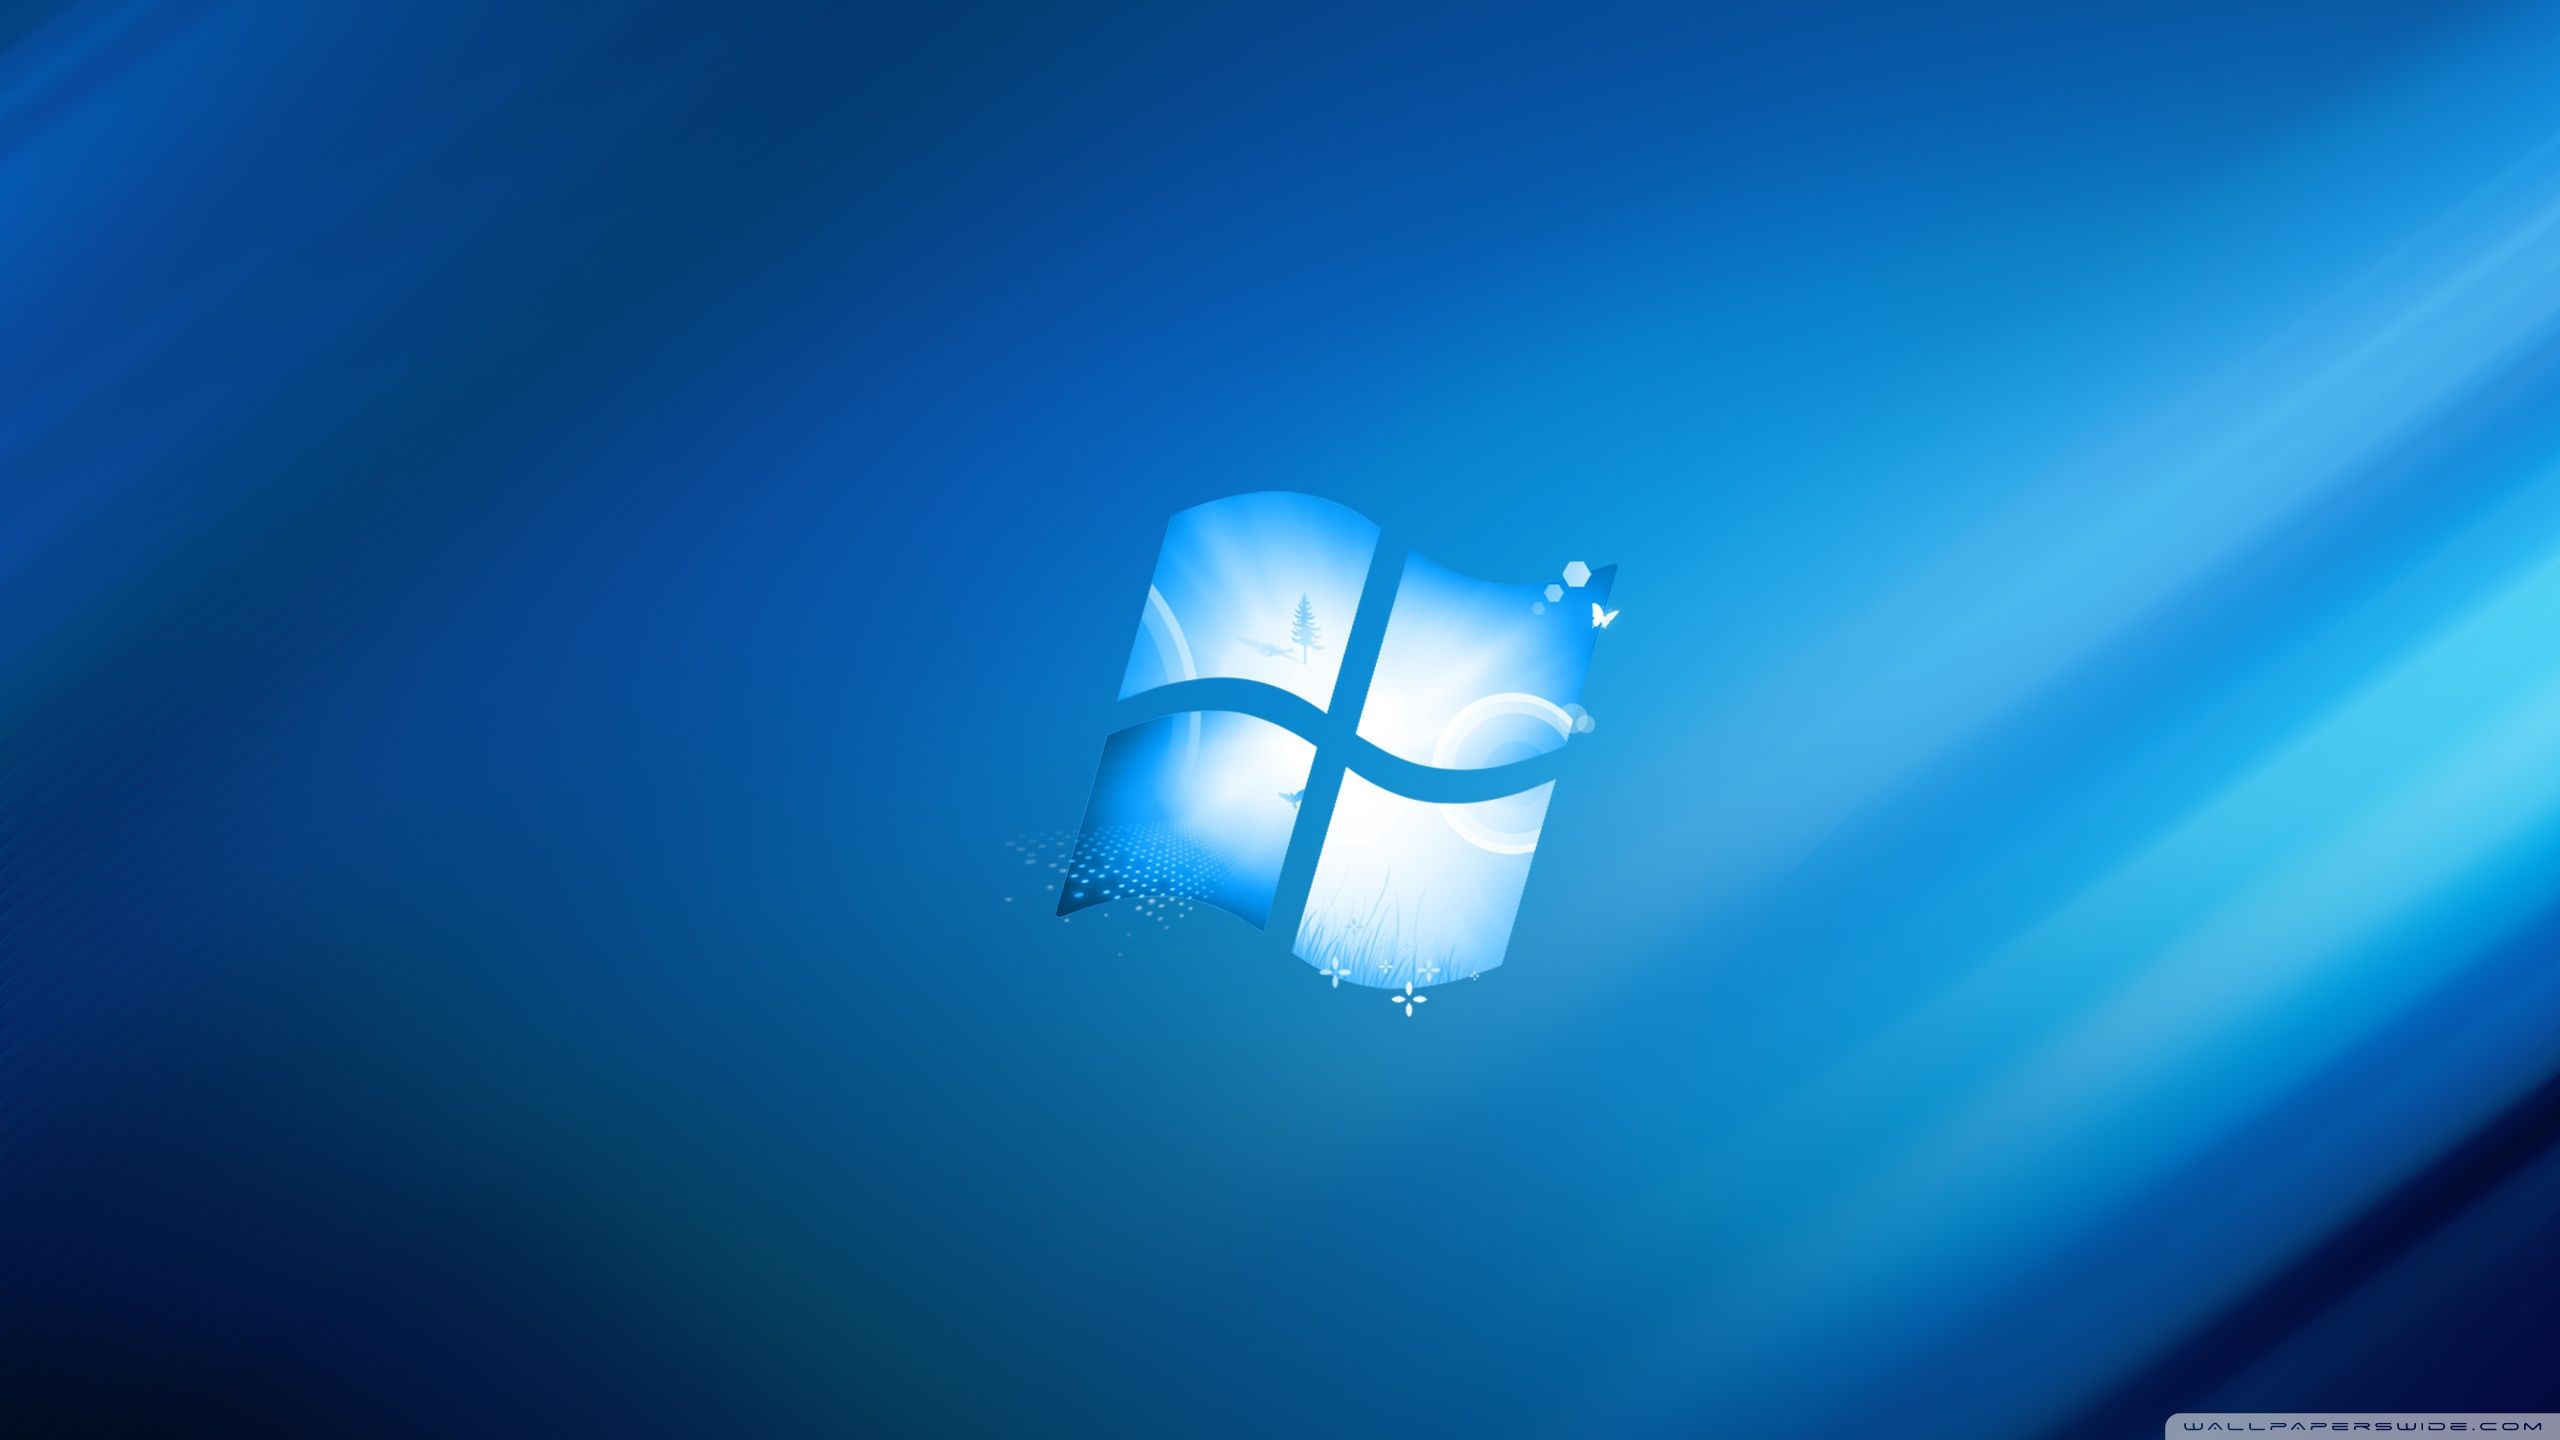 Windows 8 Blue Theme Wallpapers And Images - Wallpapers, Pictures ...